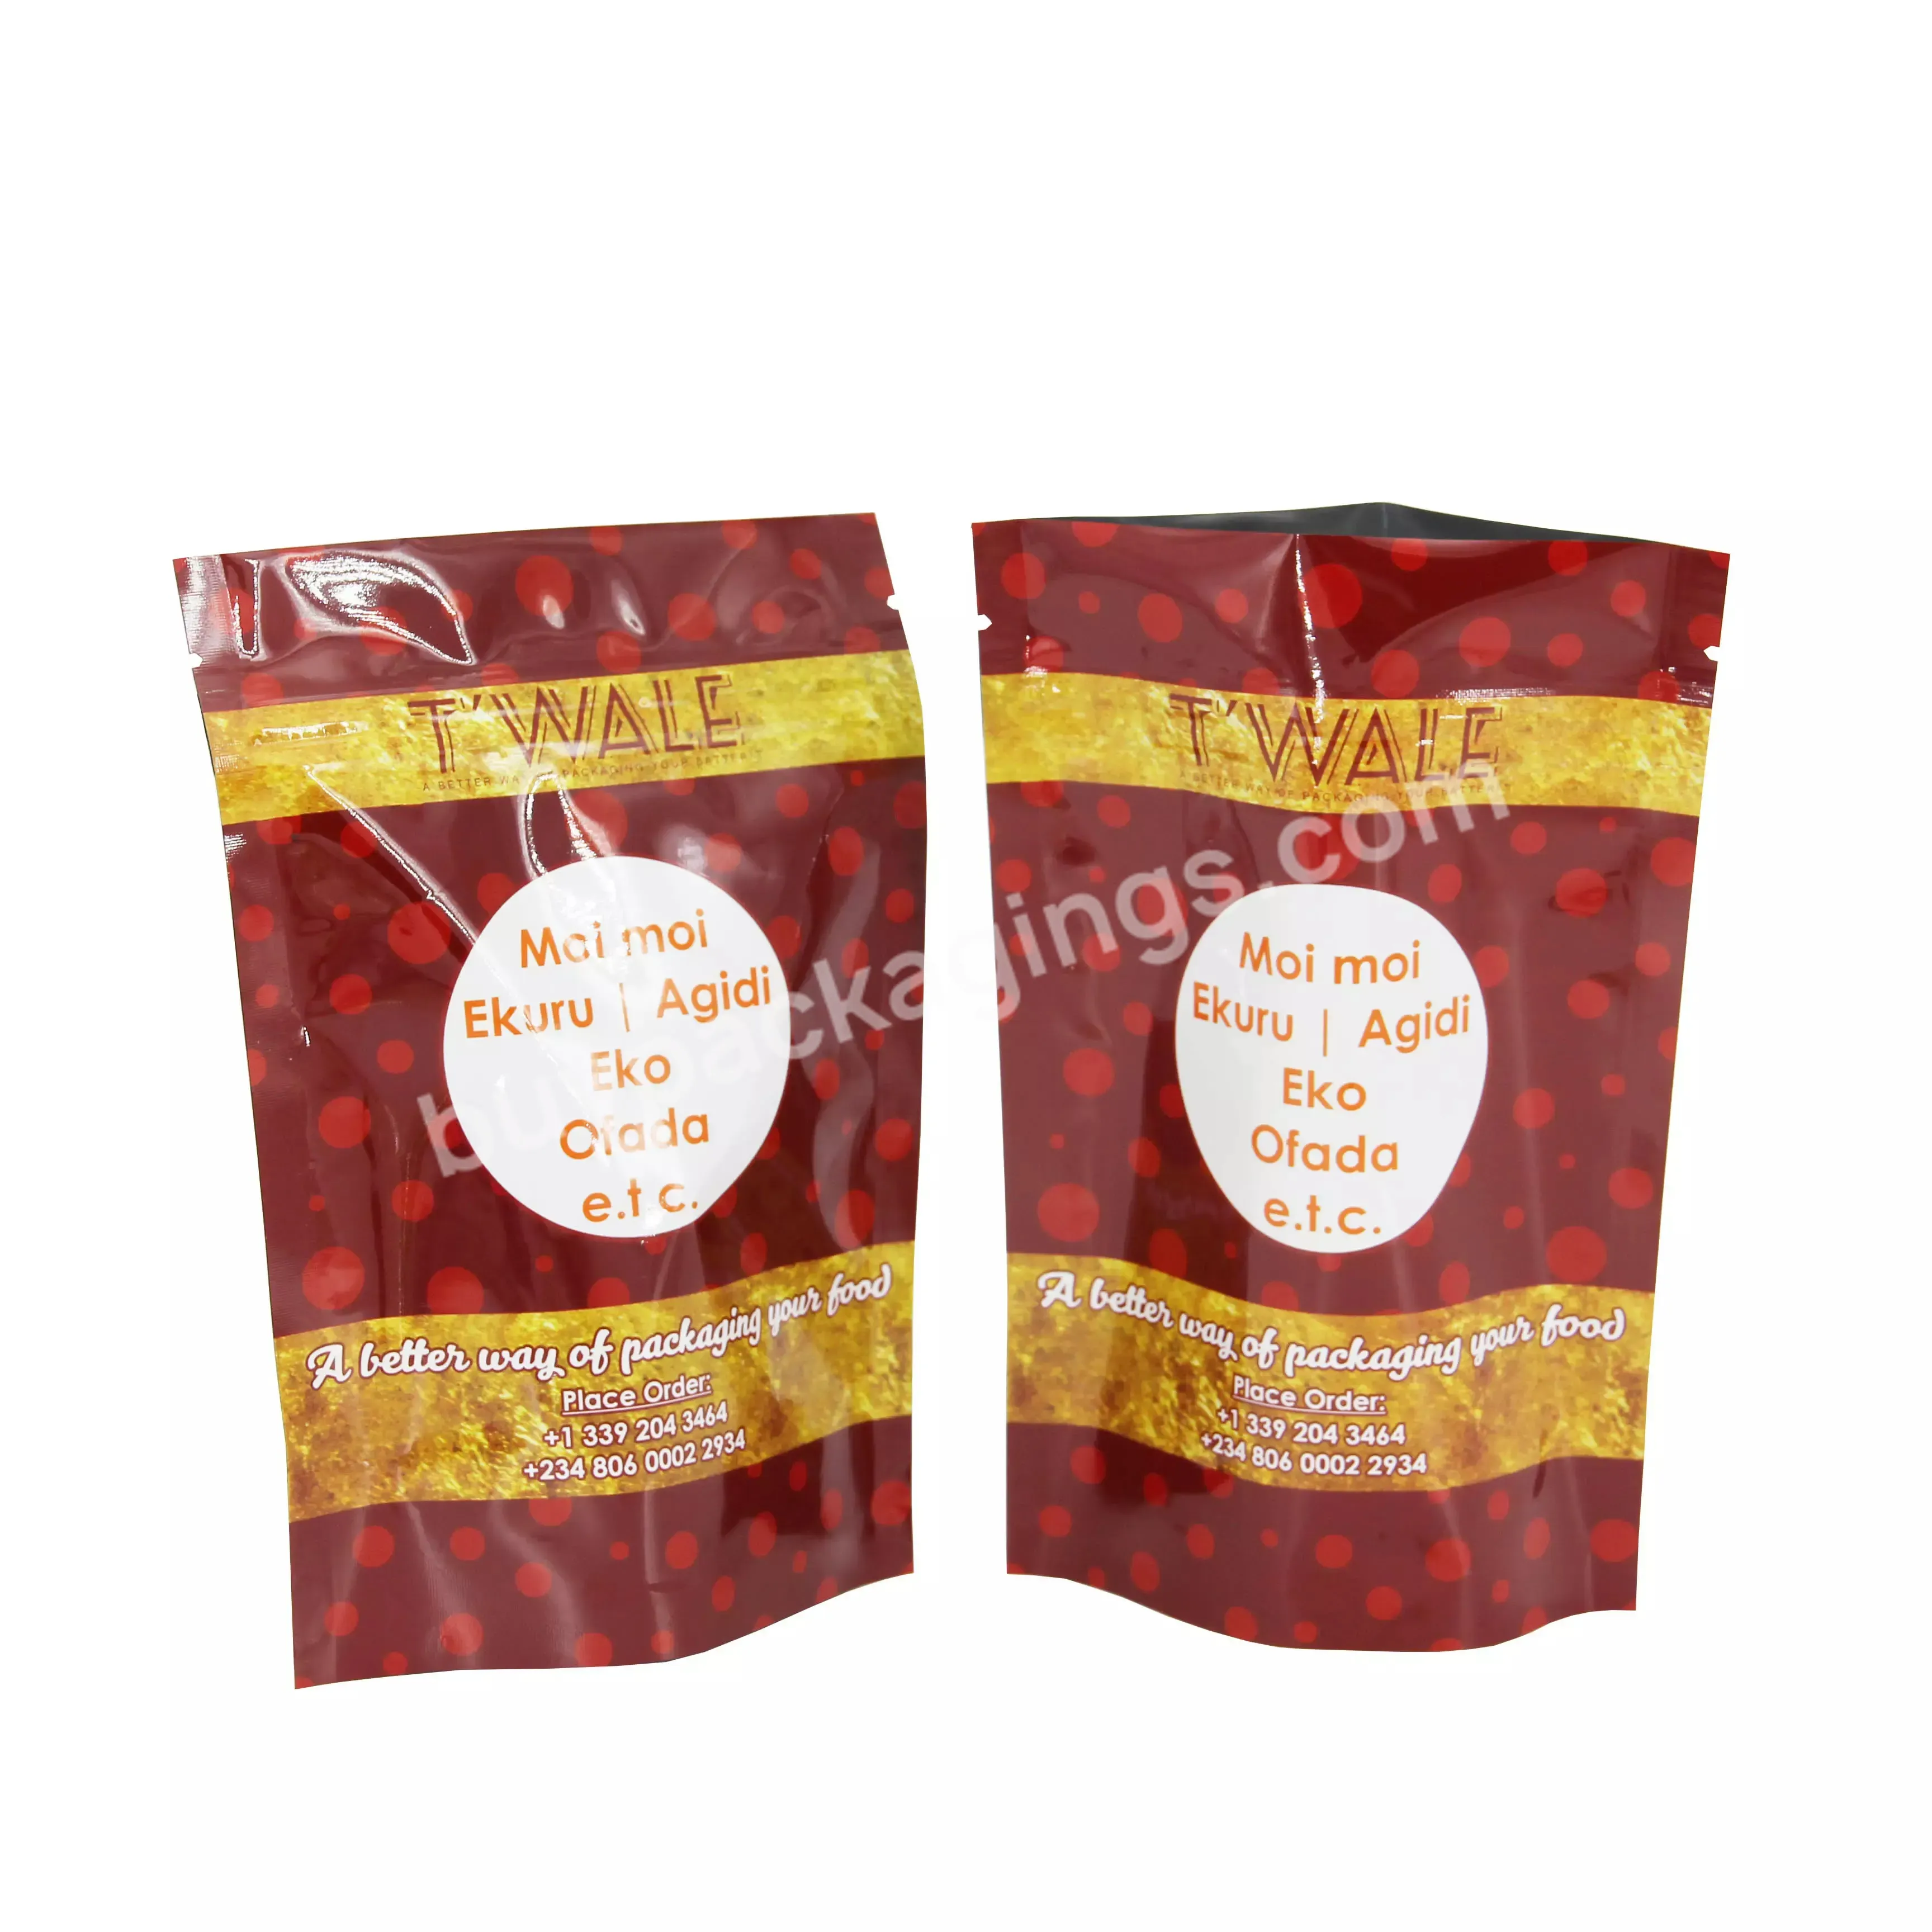 Custom Brand Non-toxic Plastic Boiling Laminated Material Steam Pouch Stand Up Zipper Bag 100 Degree Moimoi Cooking Pouch - Buy Moimoi Cooking Pouch,Non-toxic Moimoi Cooking Pouch,Food Grade Moimoi Cooking Pouch.